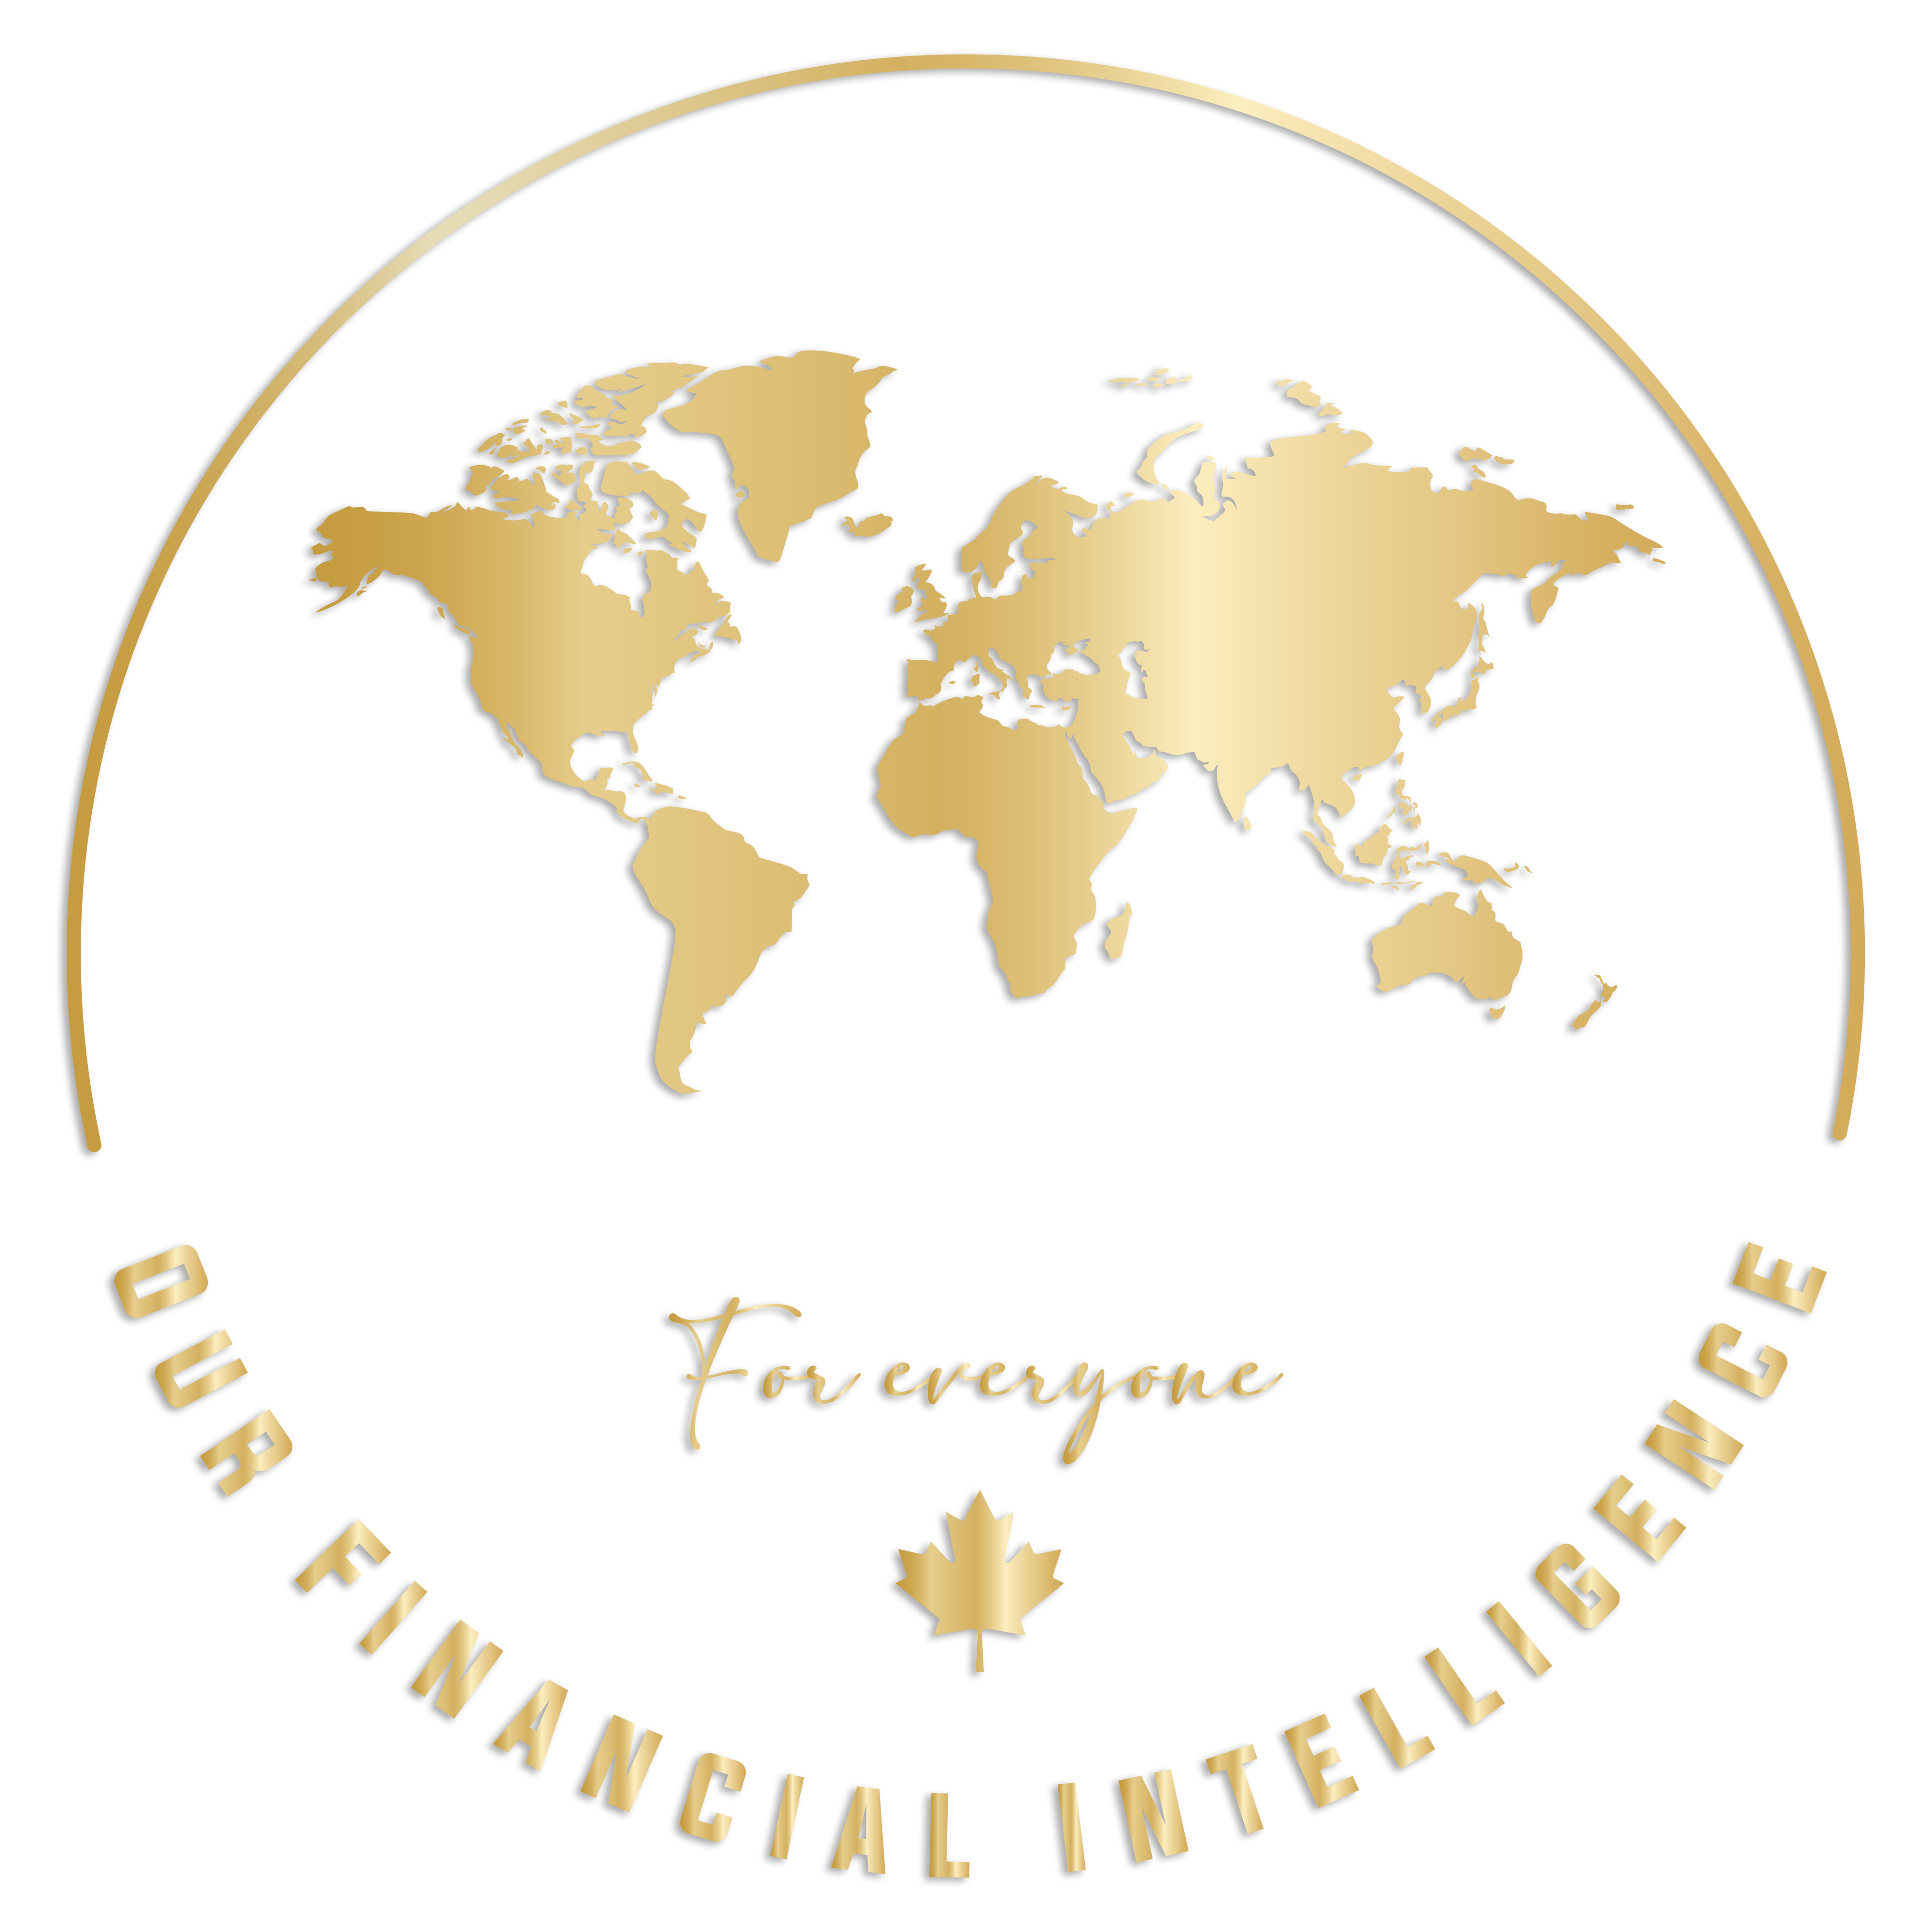 Our Financial Intelligence